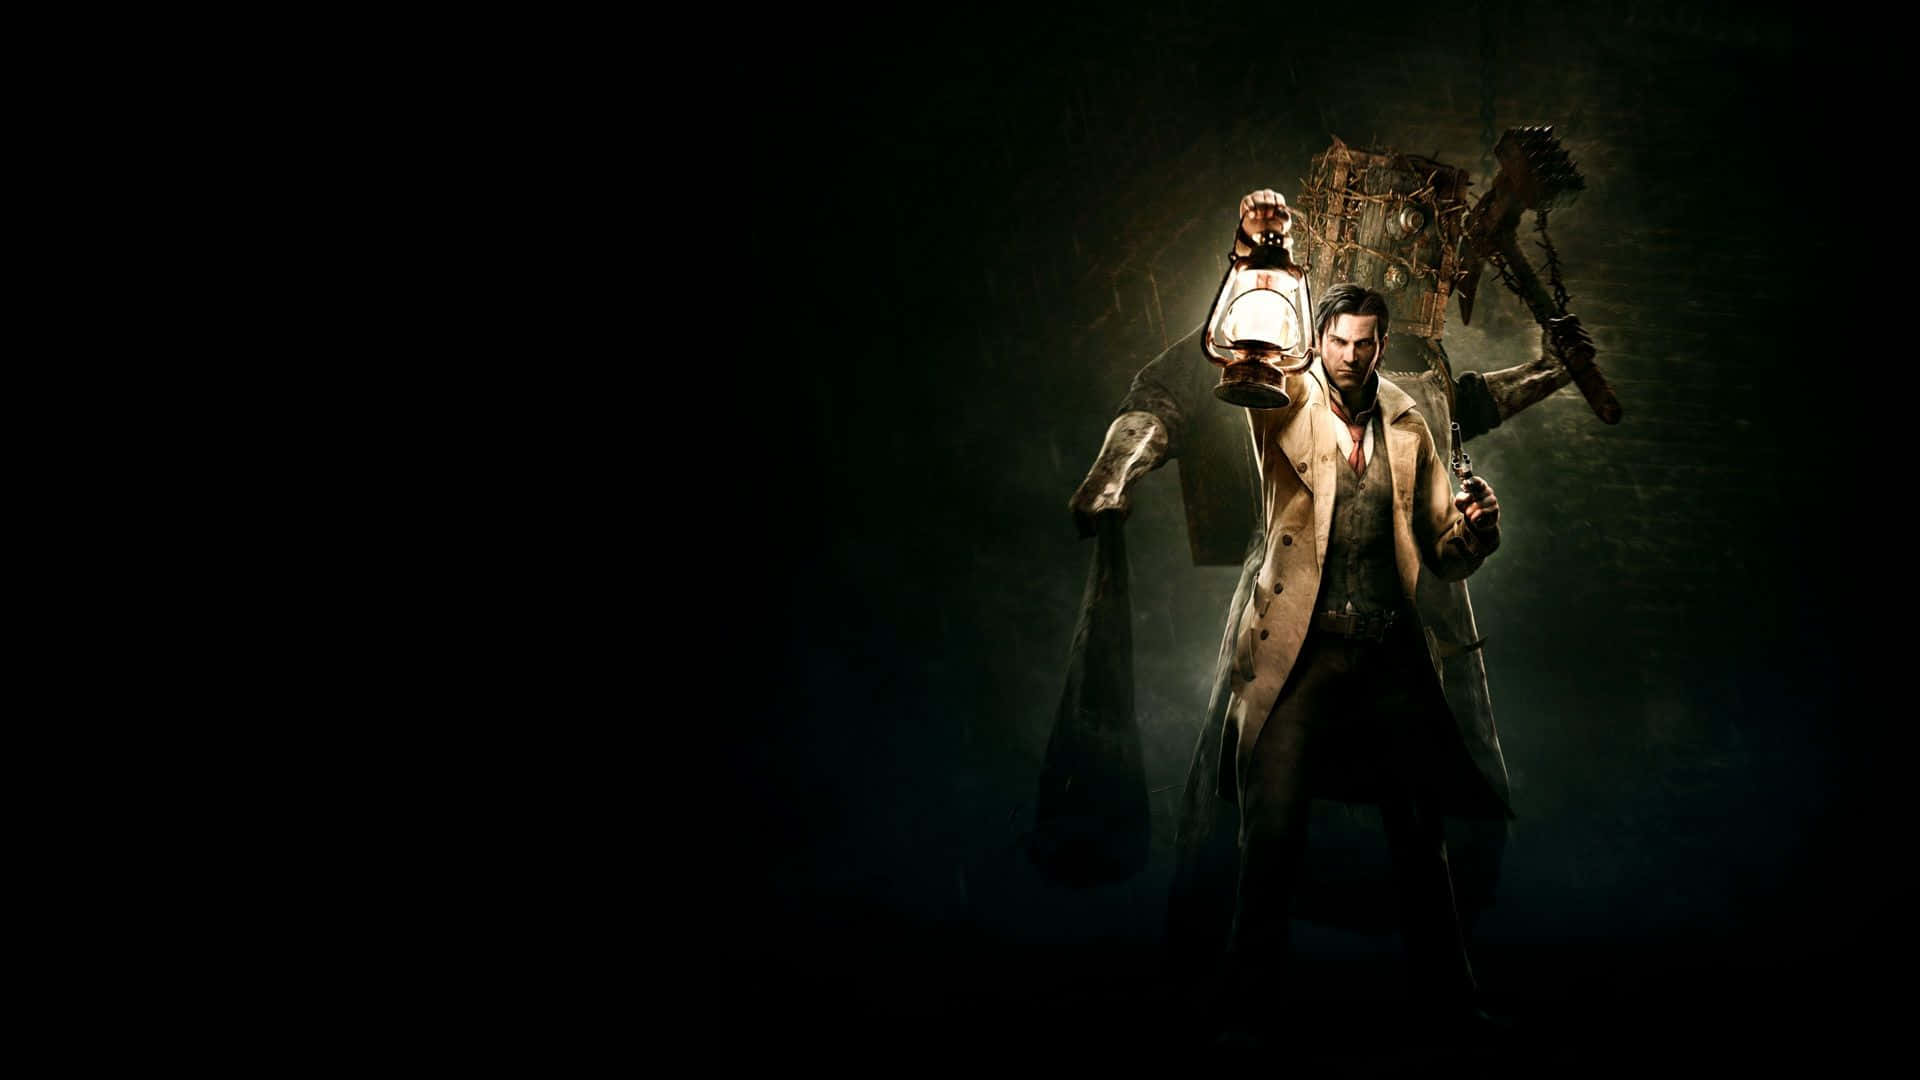 A spine-chilling scene from a horror game Wallpaper